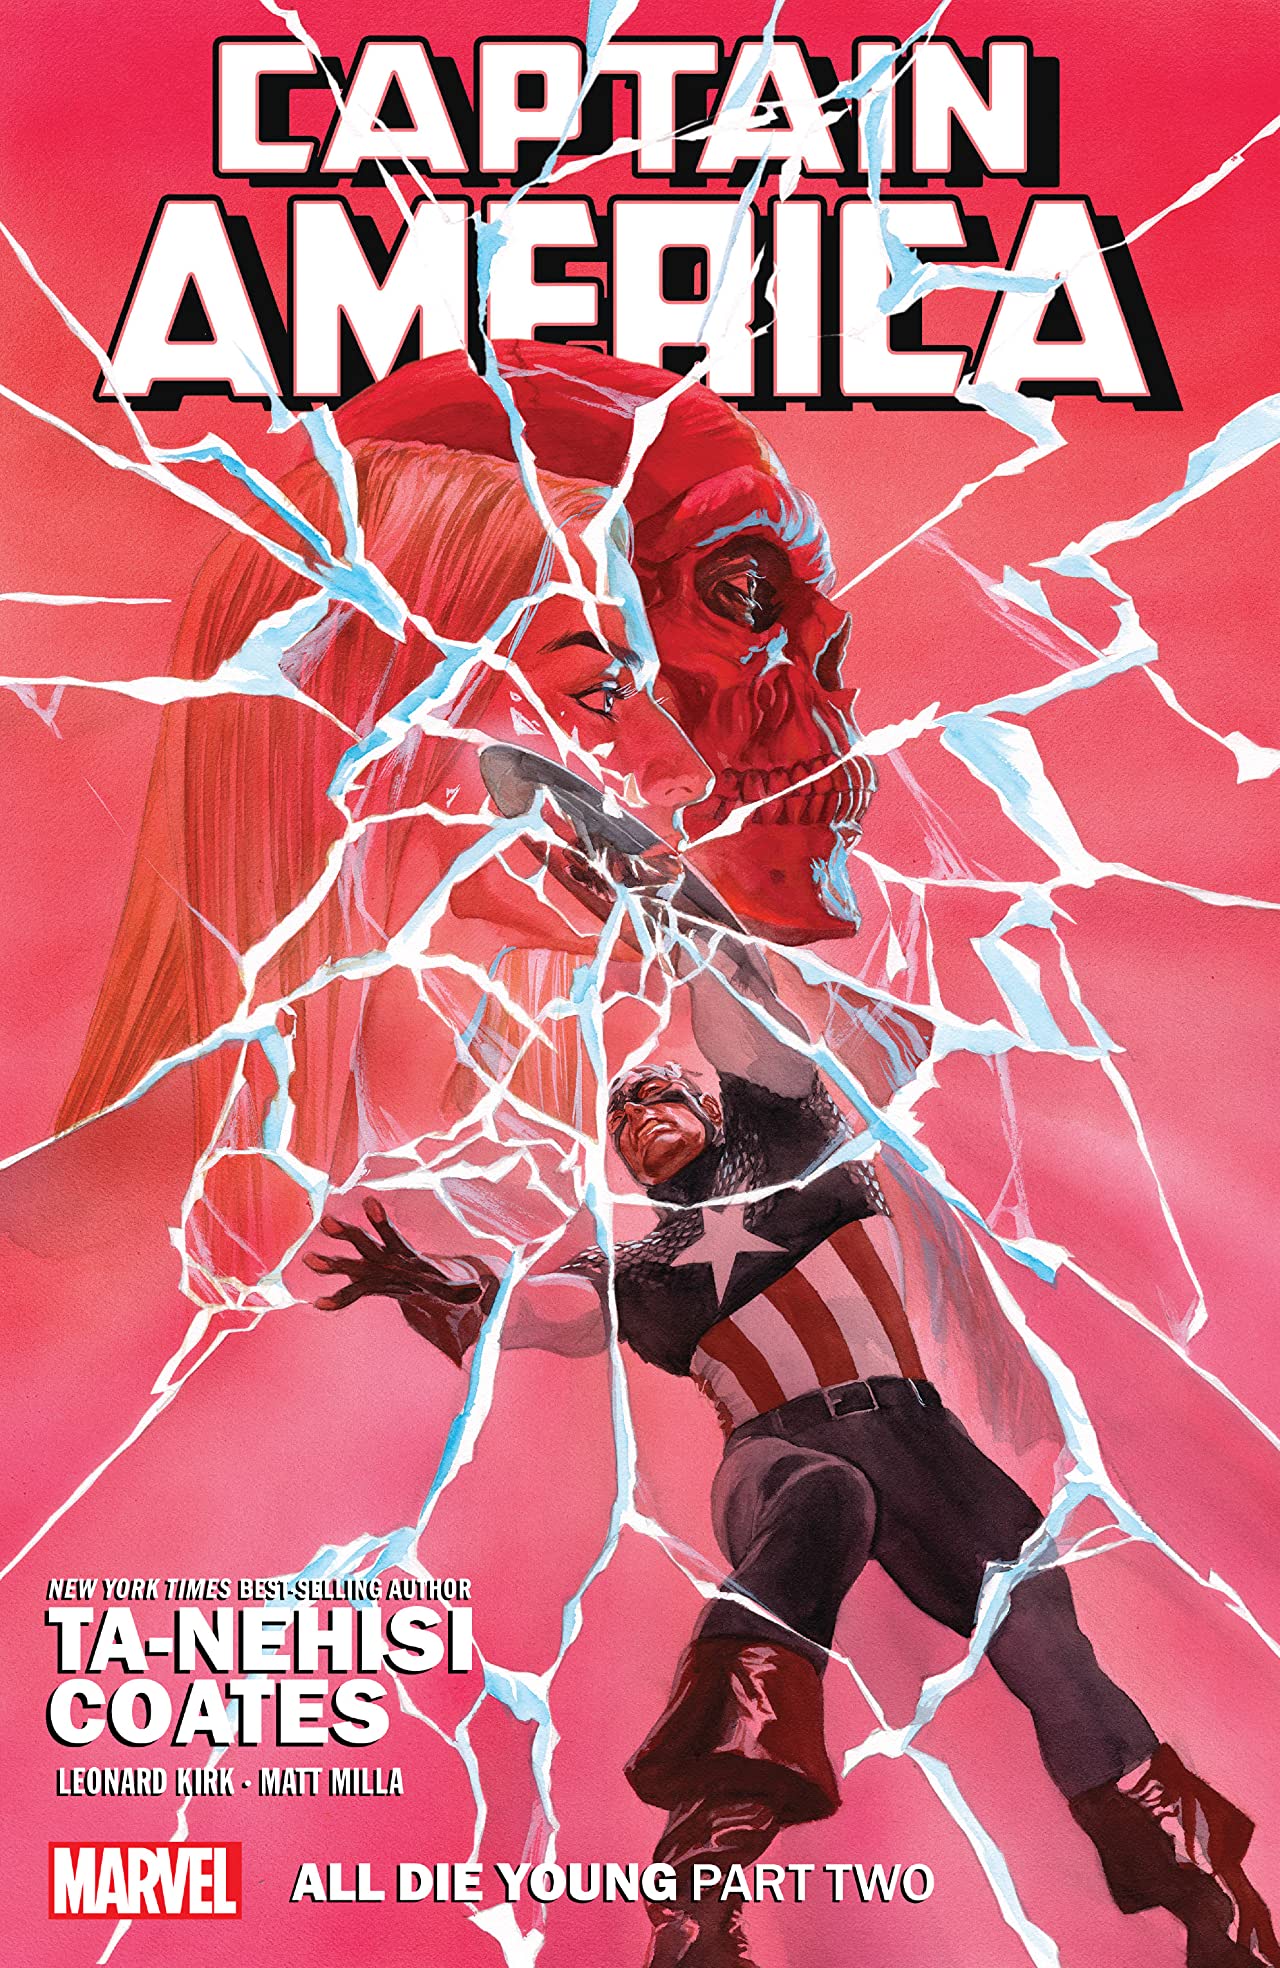 Captain America (2018) Volume 5: All Die Young - Part Two